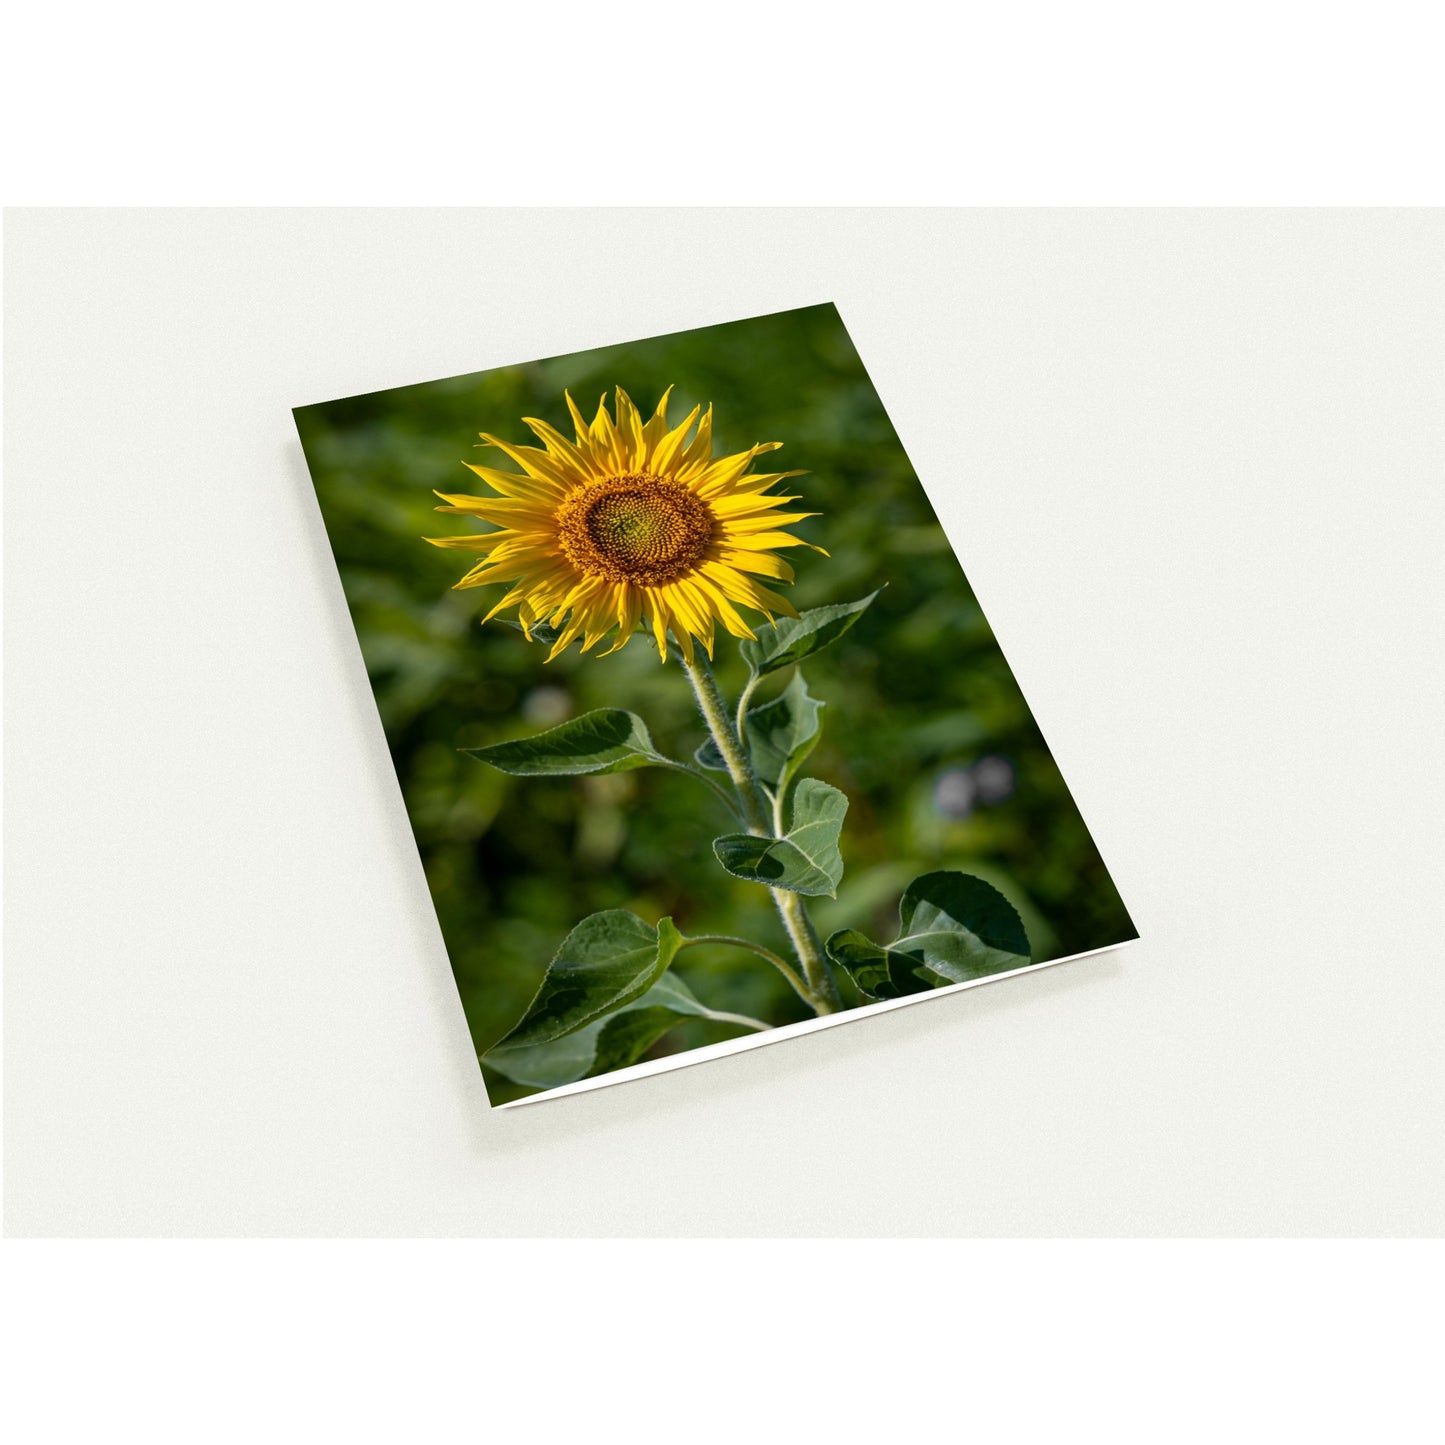 Sunflower folding card, set of 10 greeting cards and envelopes 